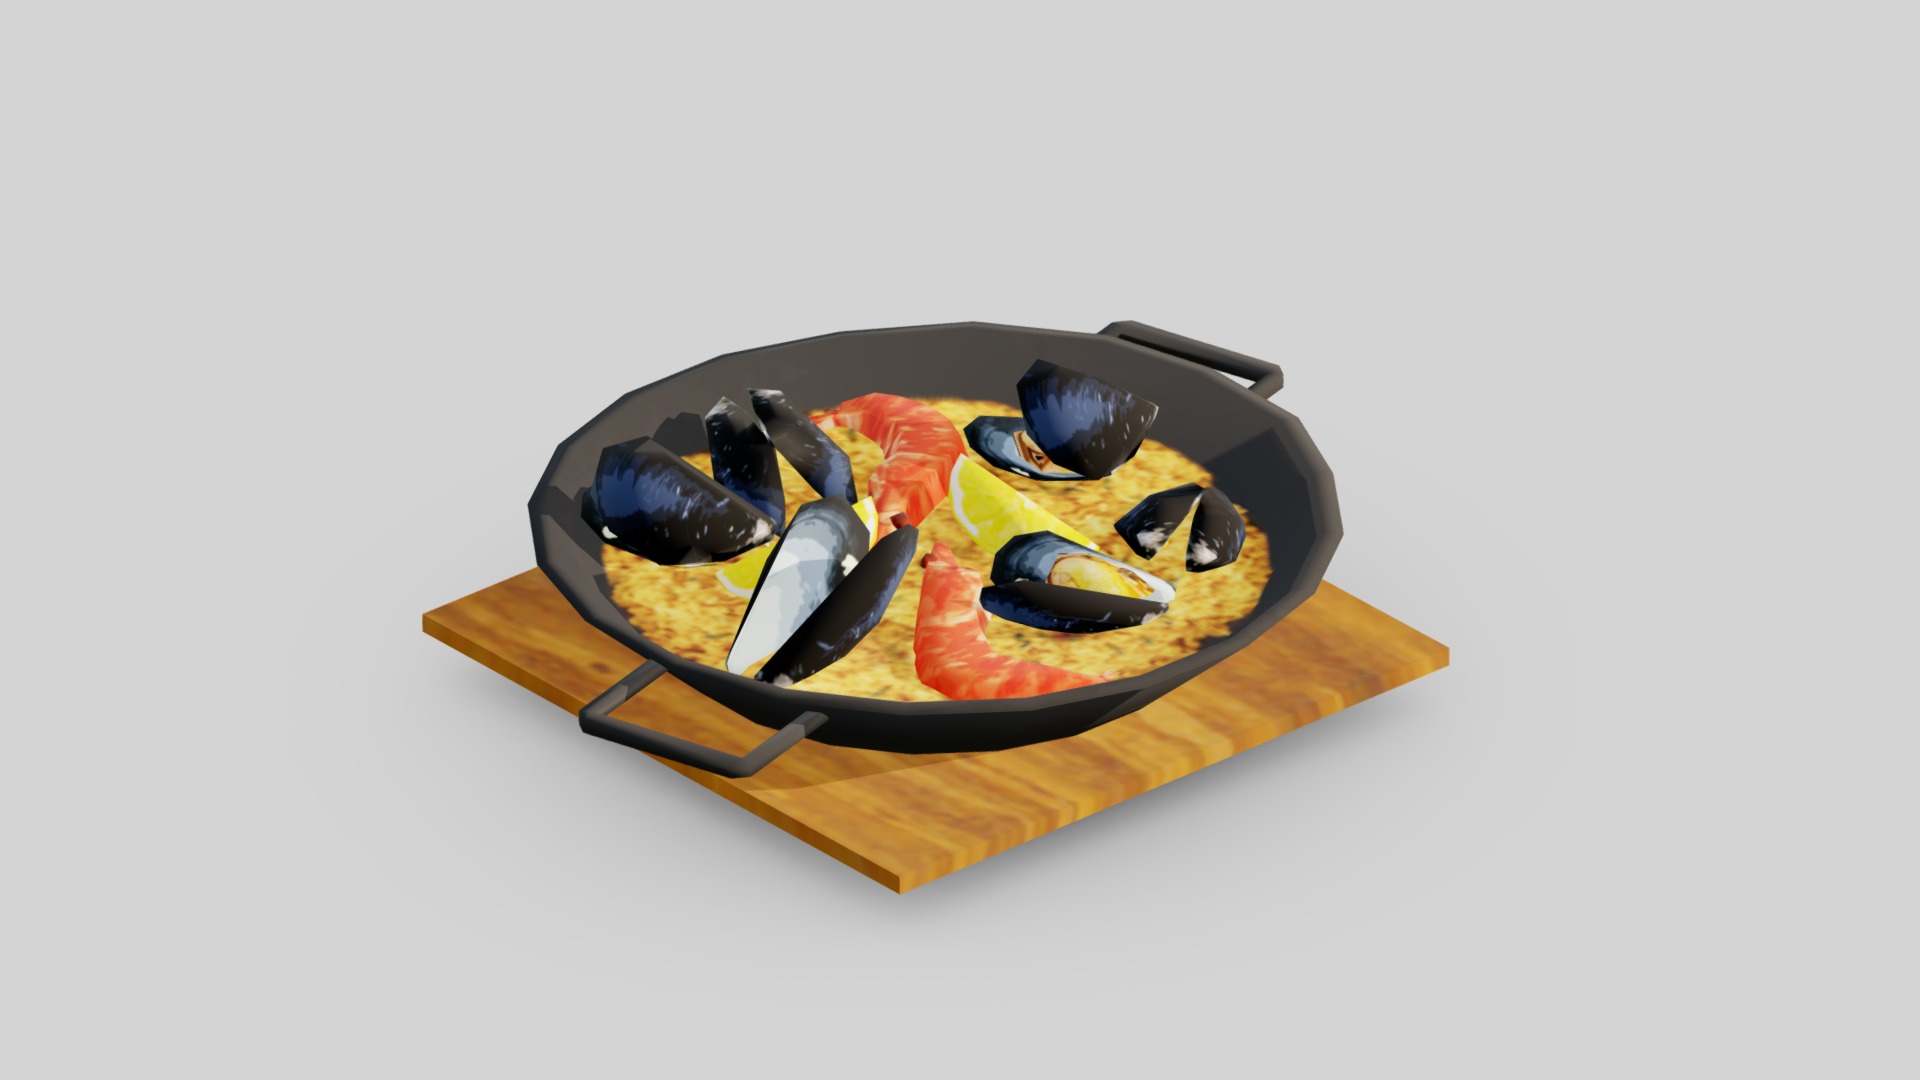 3D model Seafood Paella Low-poly - This is a 3D model of the Seafood Paella Low-poly. The 3D model is about a black and yellow shoe.